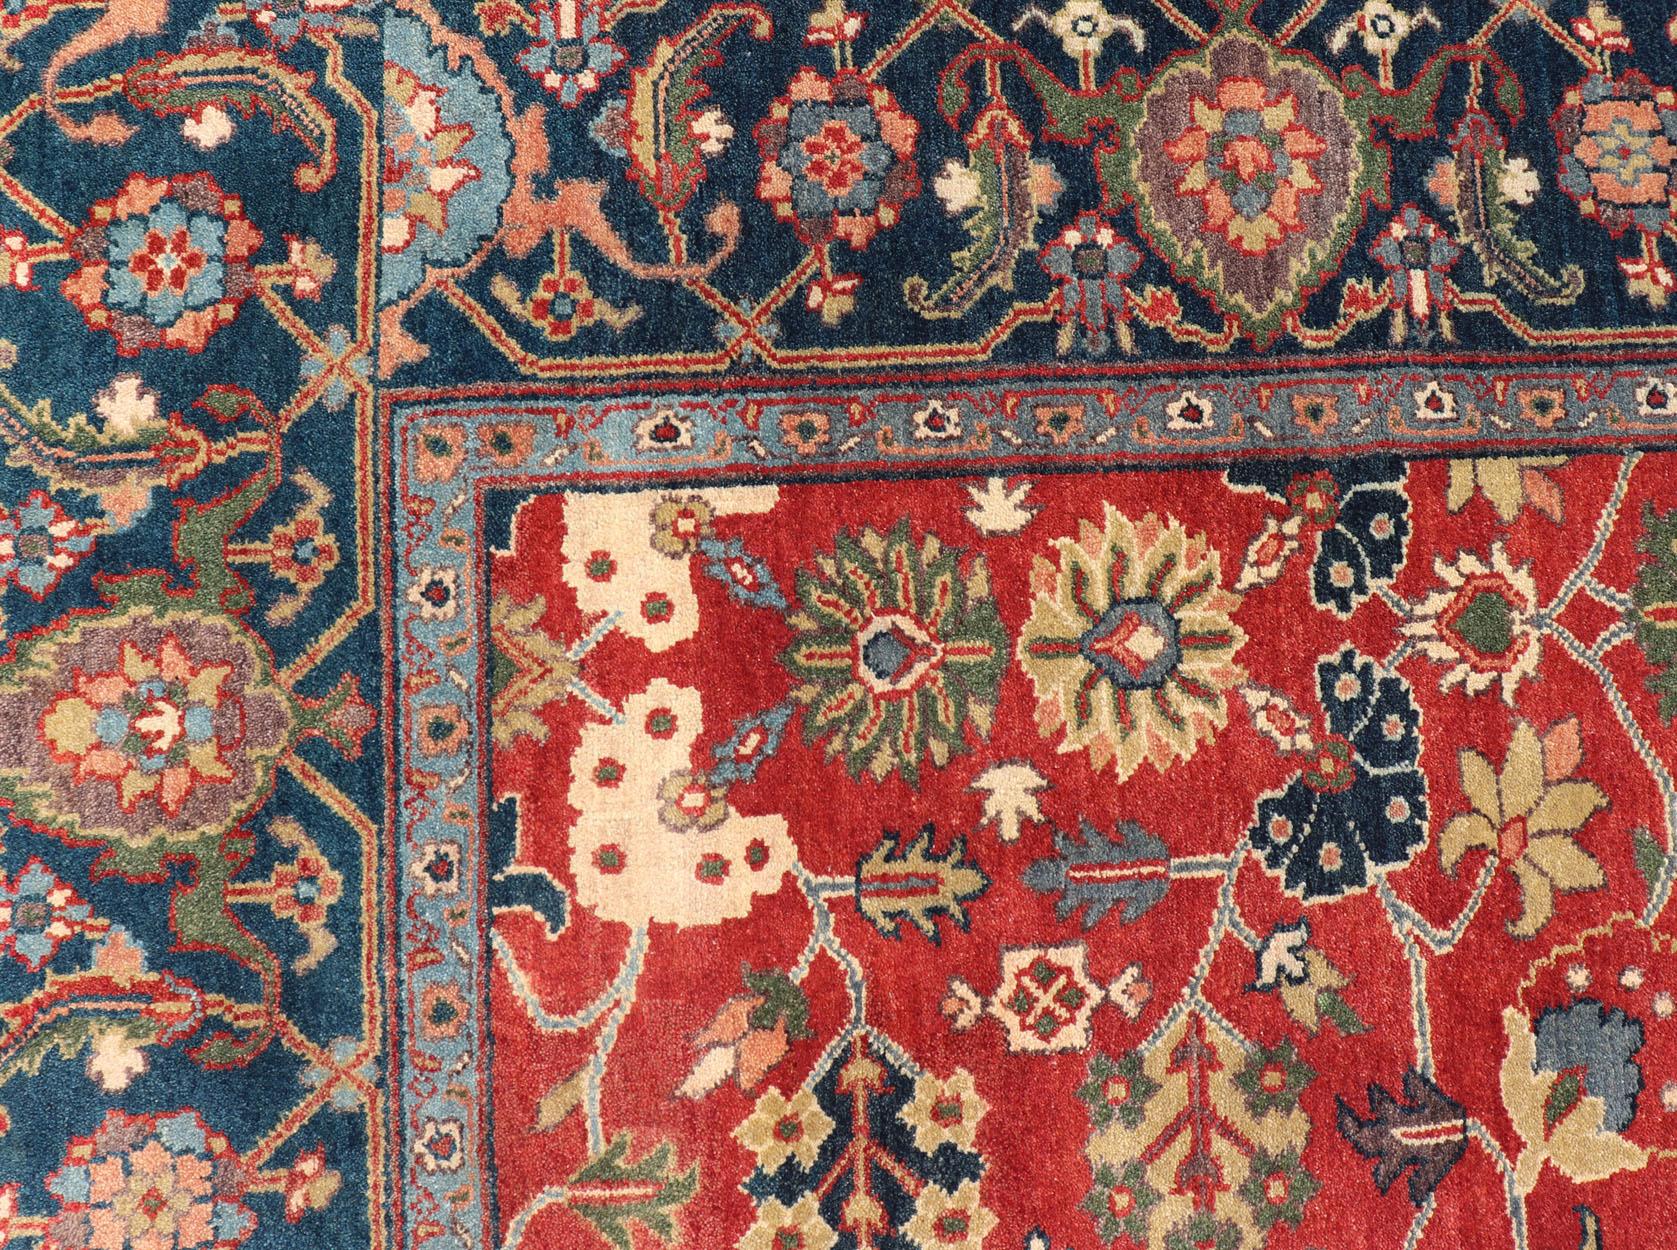 Reproduction Sultanabad-Mahal All-over Floral Hand-Knotted Carpet  2